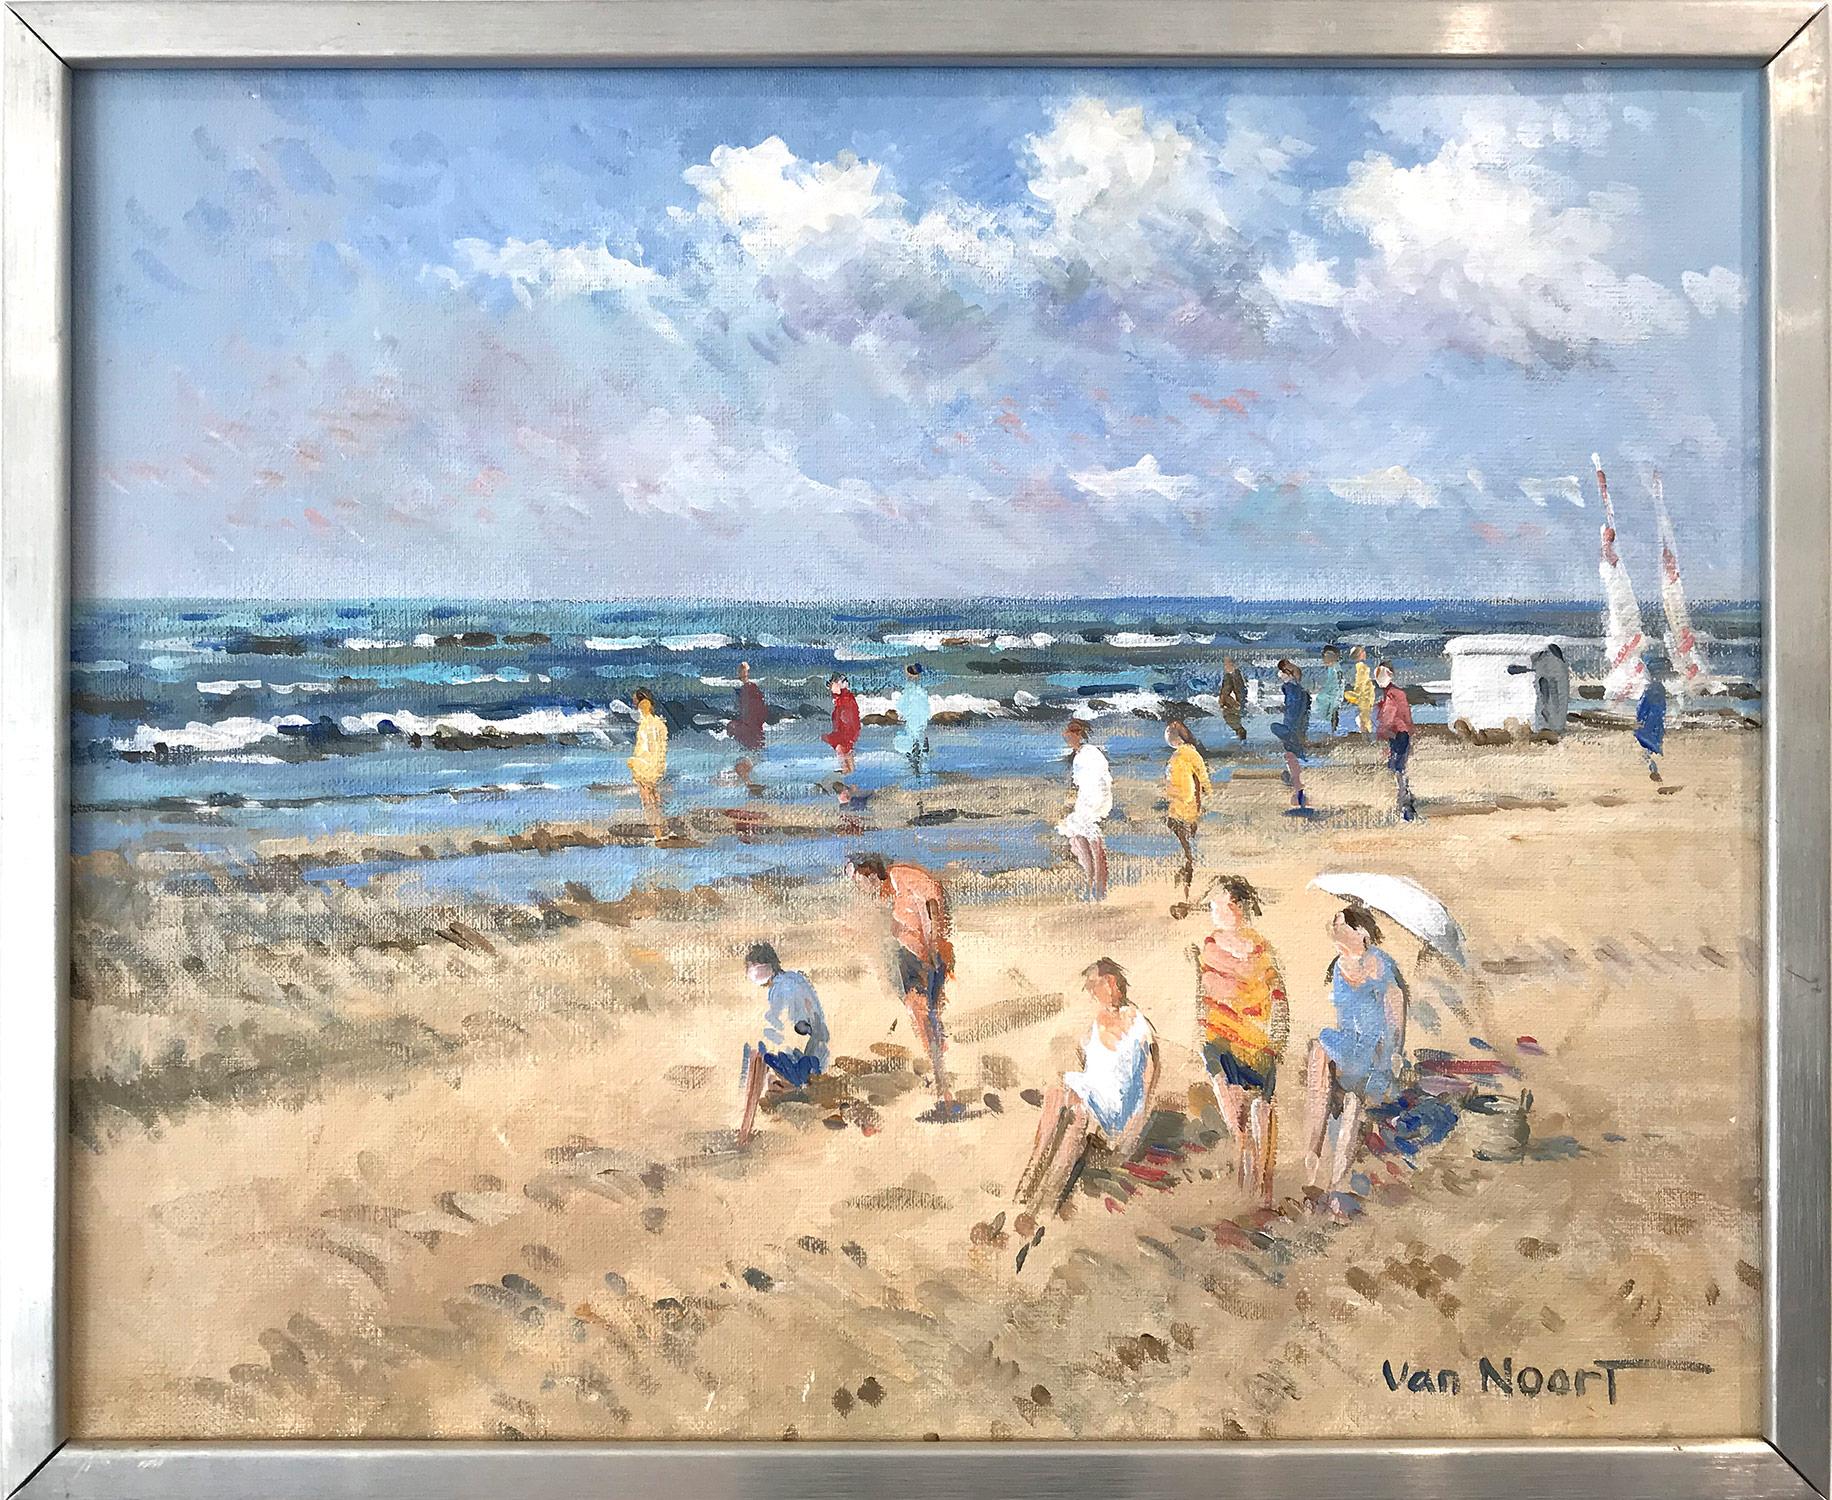 "At the Beach" Impressionistic Oil Painting of Figures in Zandvoort Holland